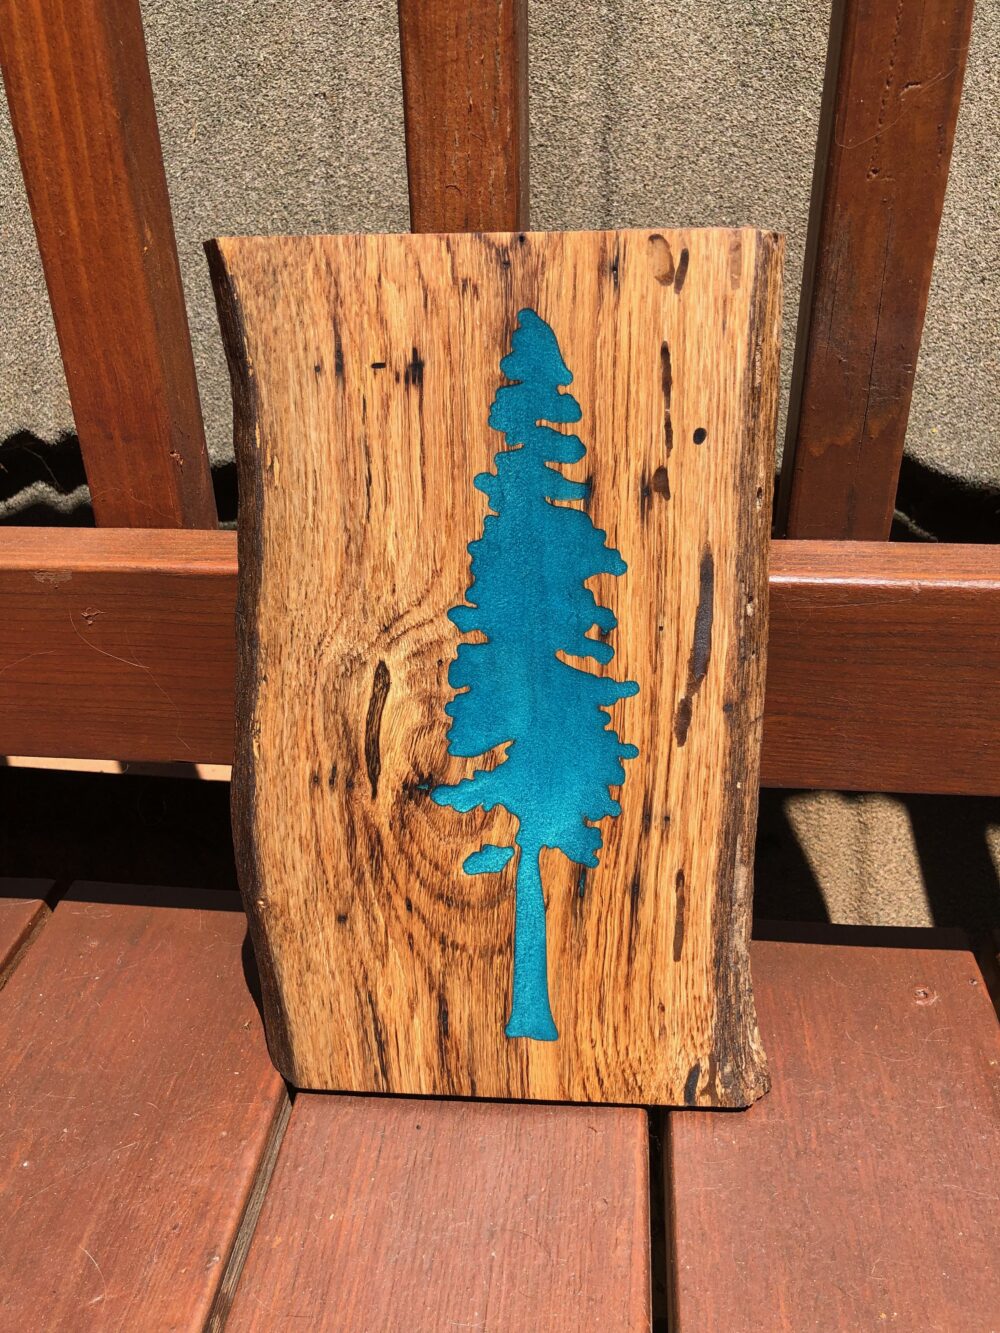 Redwood tree engraved in wood and filled with epoxy